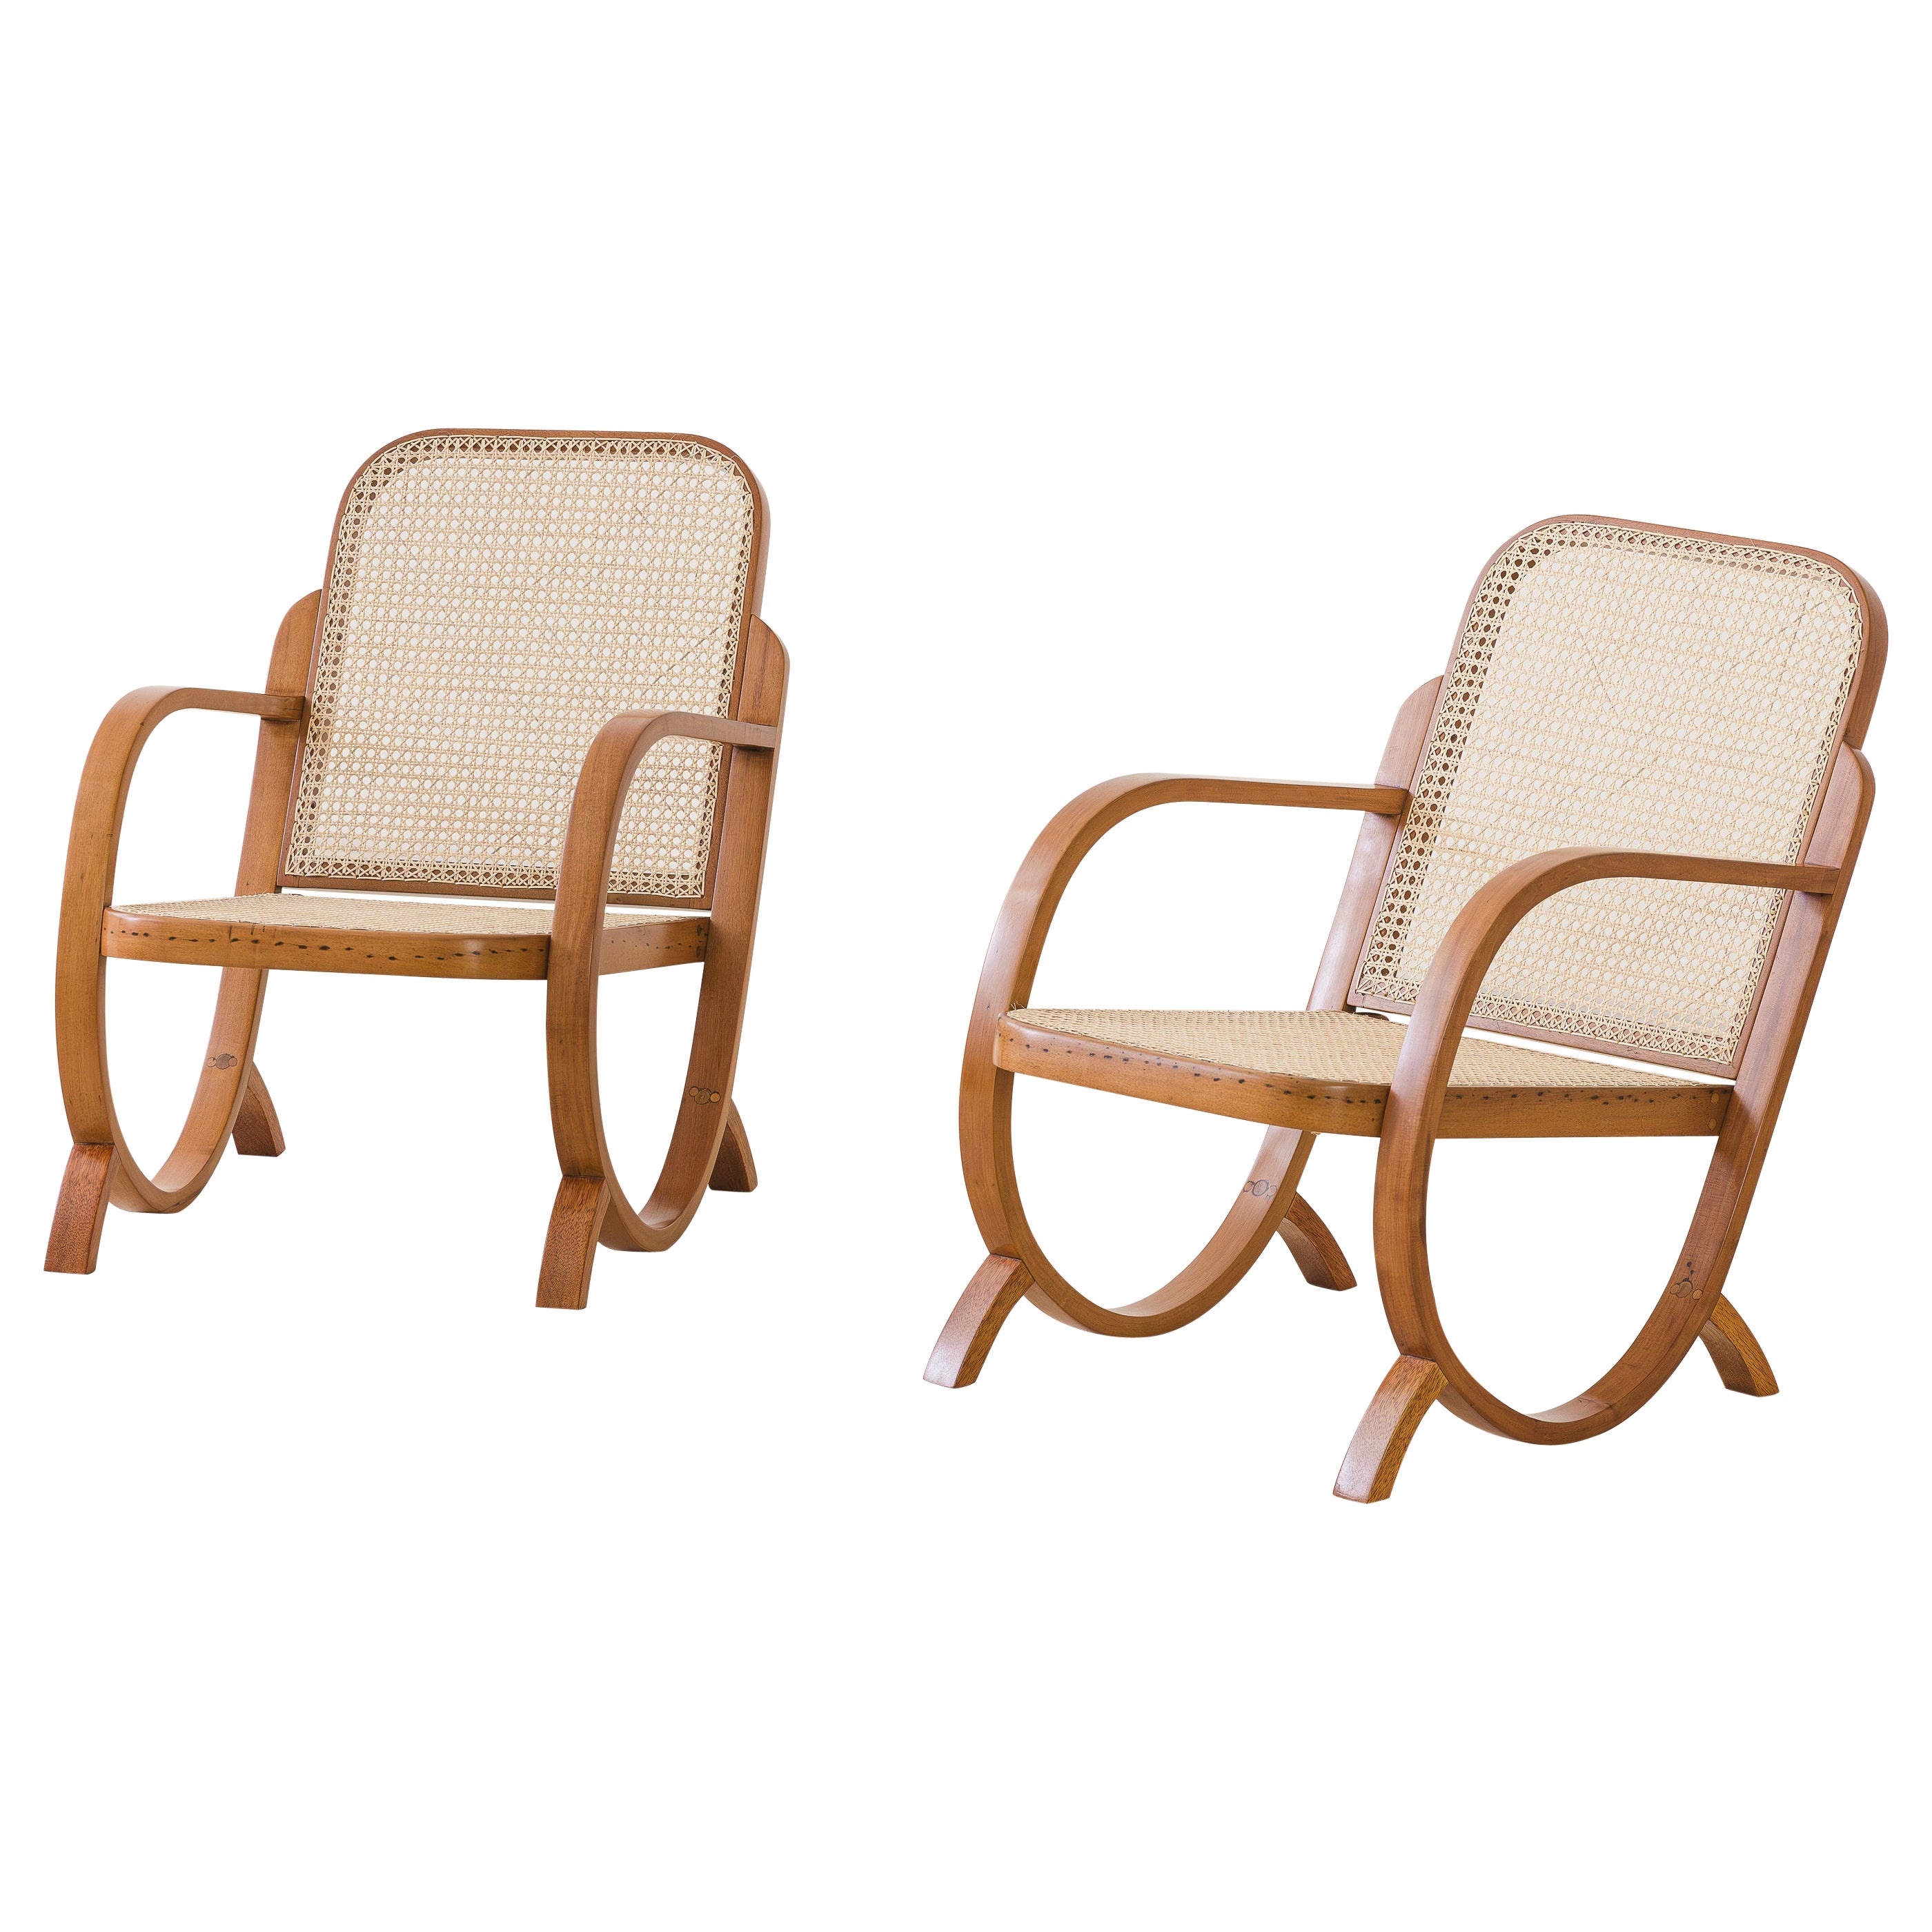 Pair of Armchairs by Moveis Gerdau, Bentwood and Cane, 1930